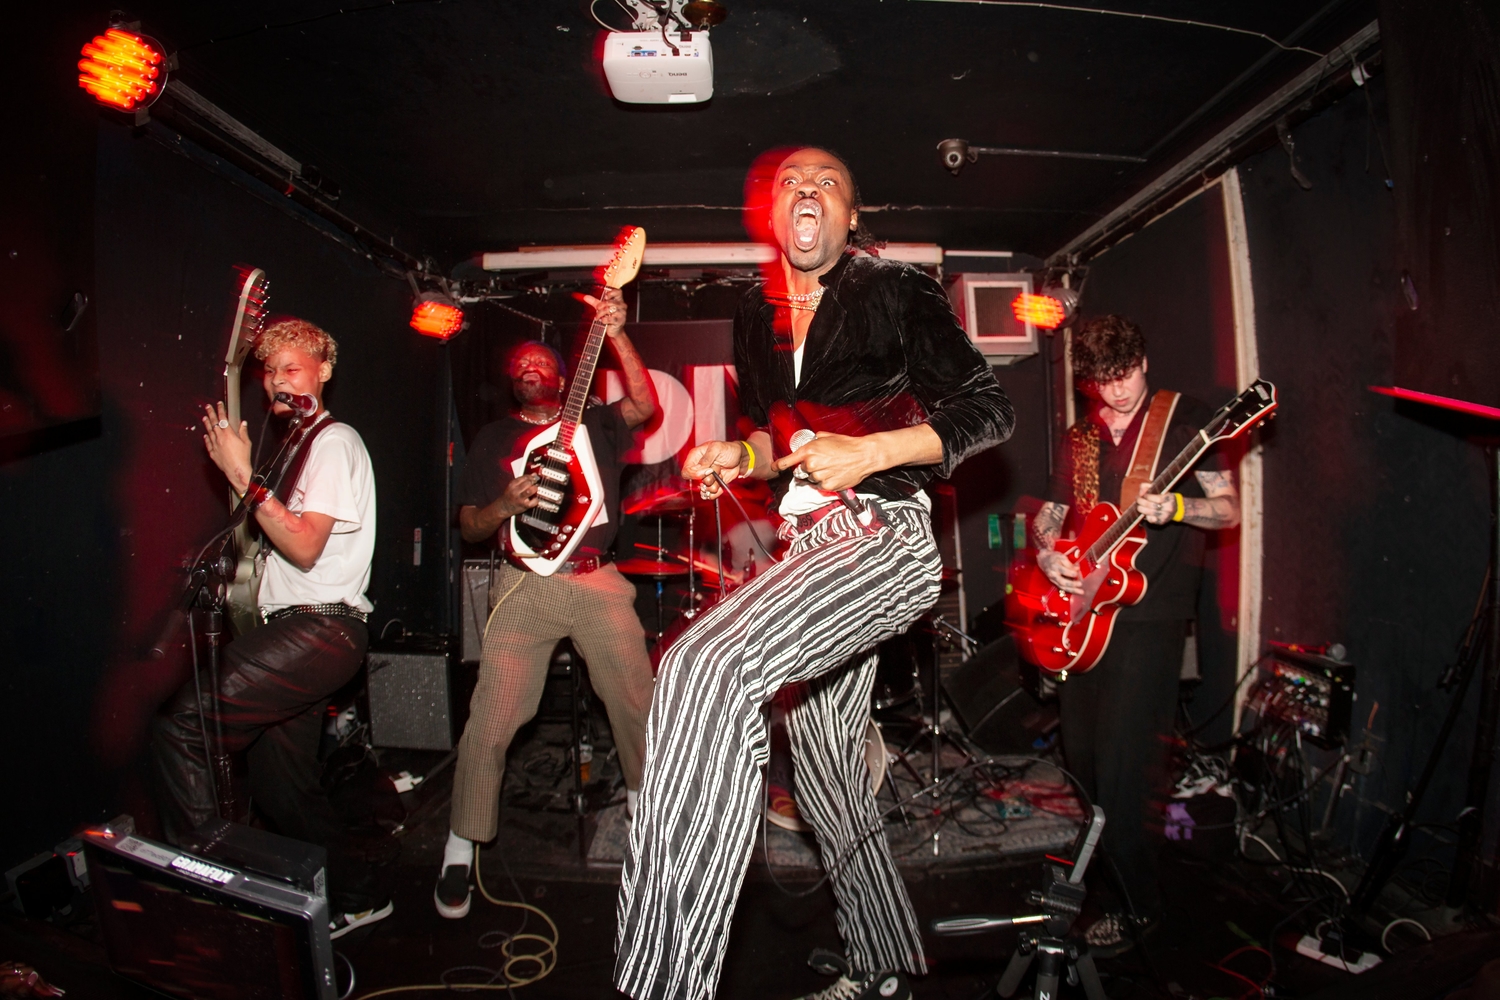 Home Counties, Cosmorat and more ramp up the energy for Night Three of DIY’s Hello 2024 series